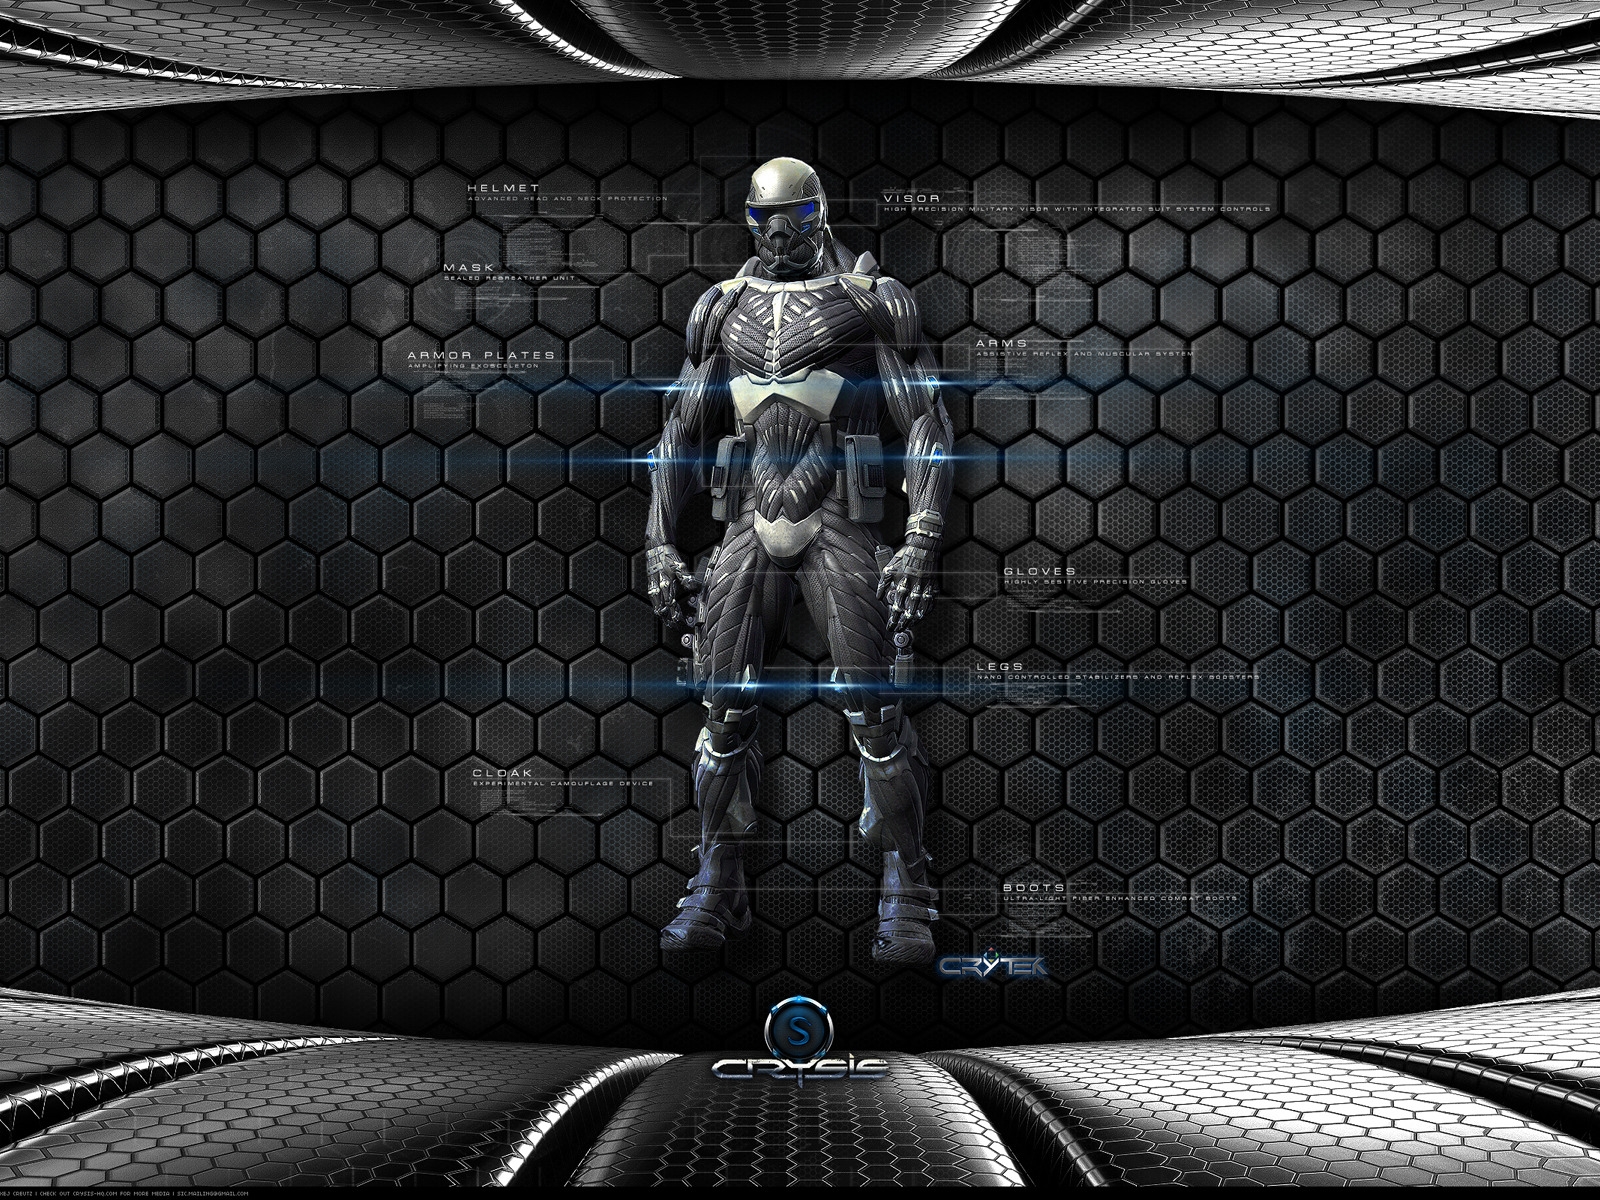 Crysis Character for 1600 x 1200 resolution